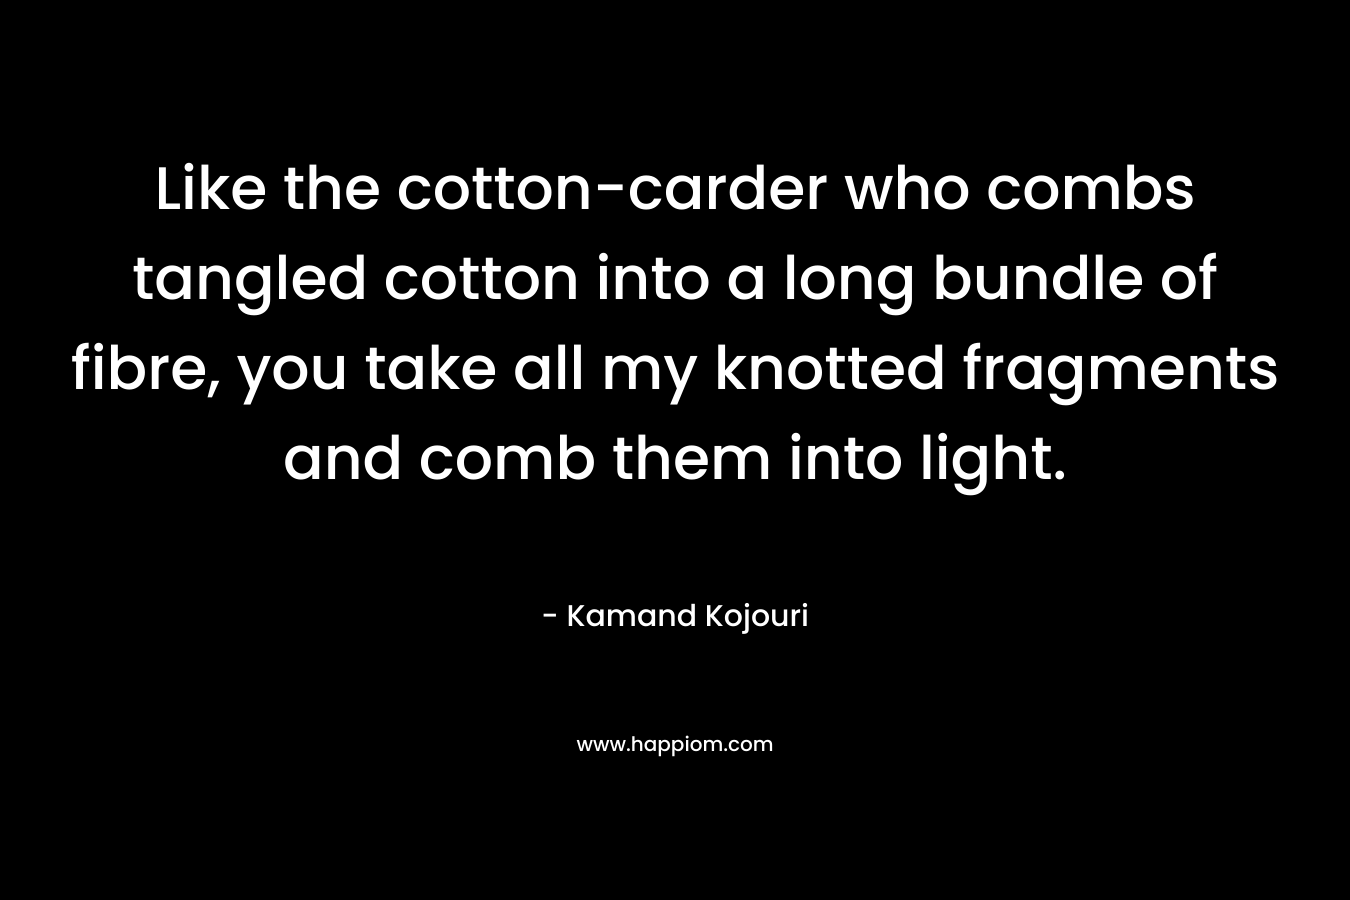 Like the cotton-carder who combs tangled cotton into a long bundle of fibre, you take all my knotted fragments and comb them into light.